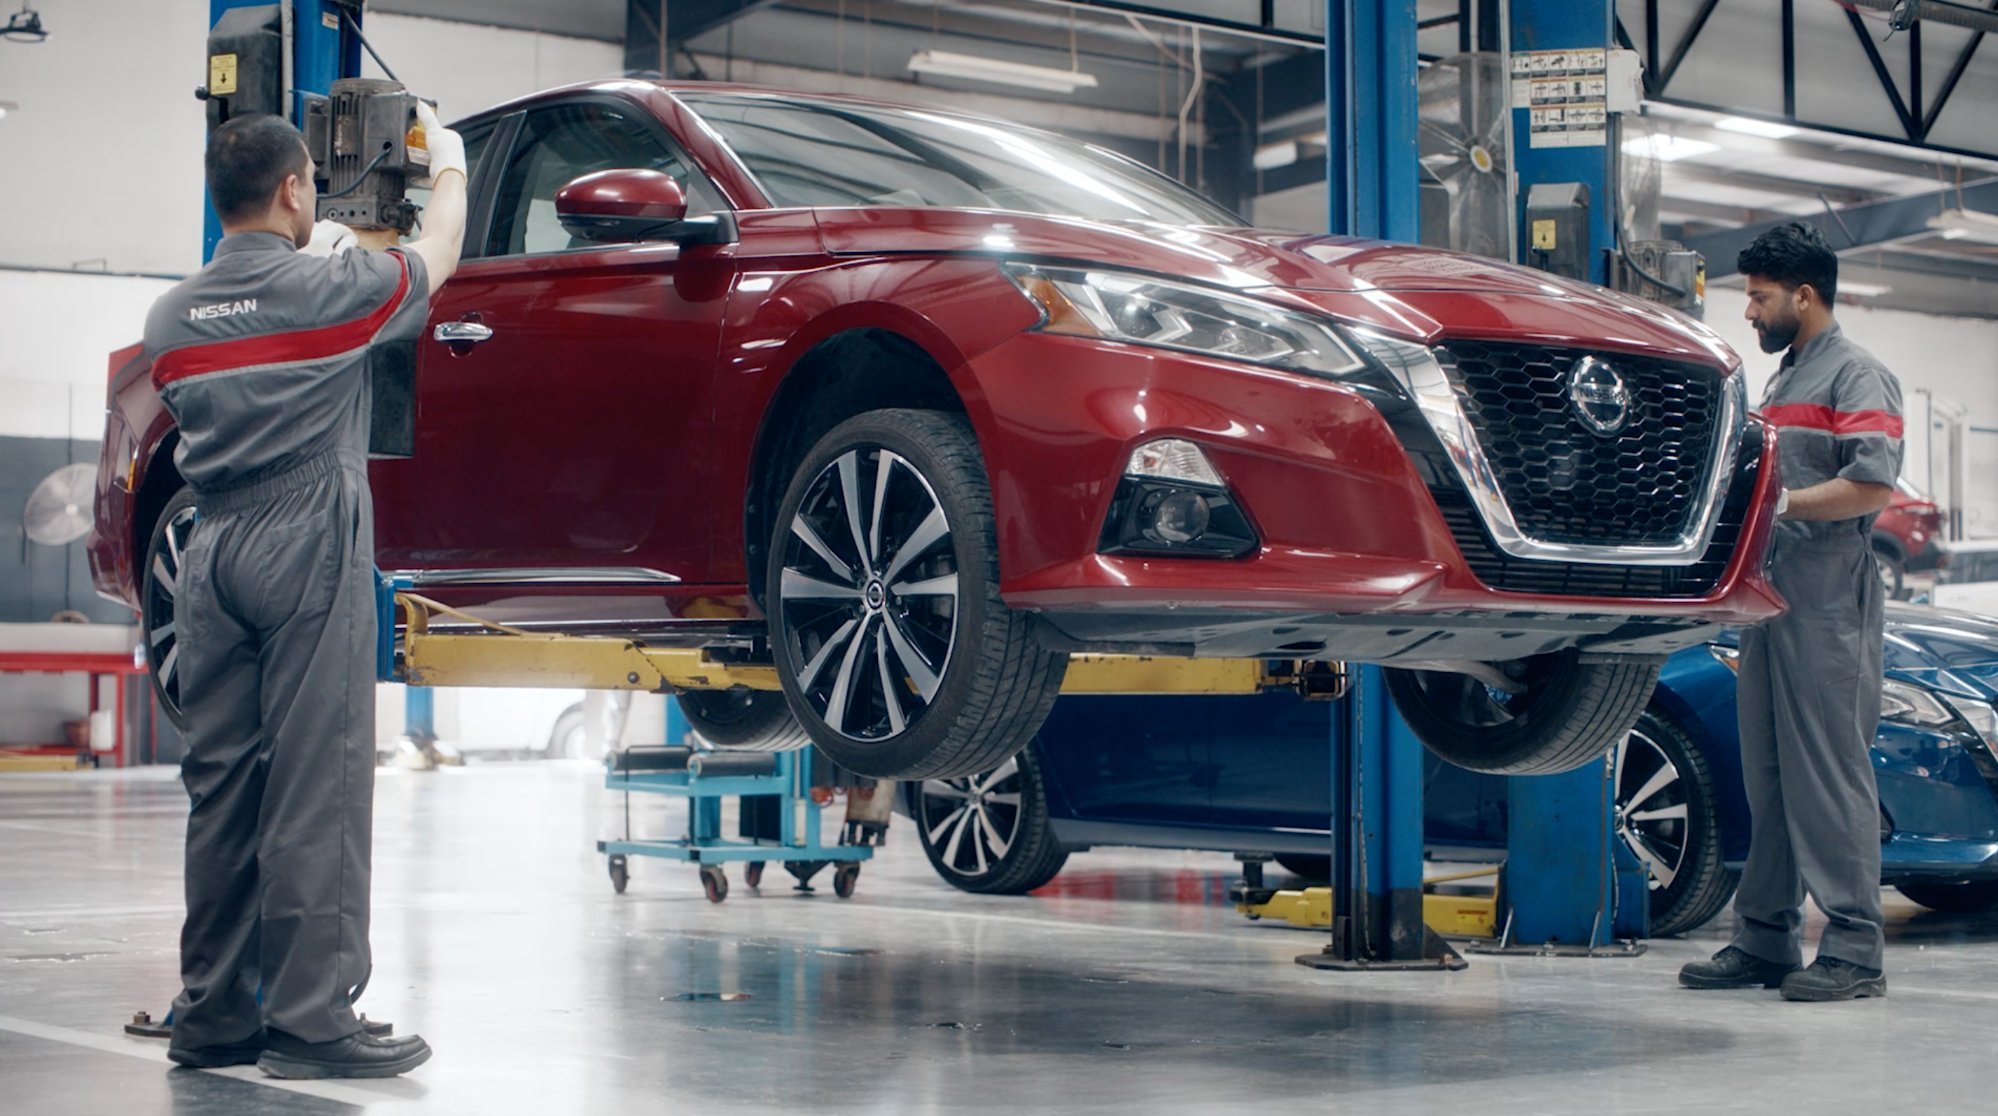 Nissan launches Nissan Service to elevate customer service in the region